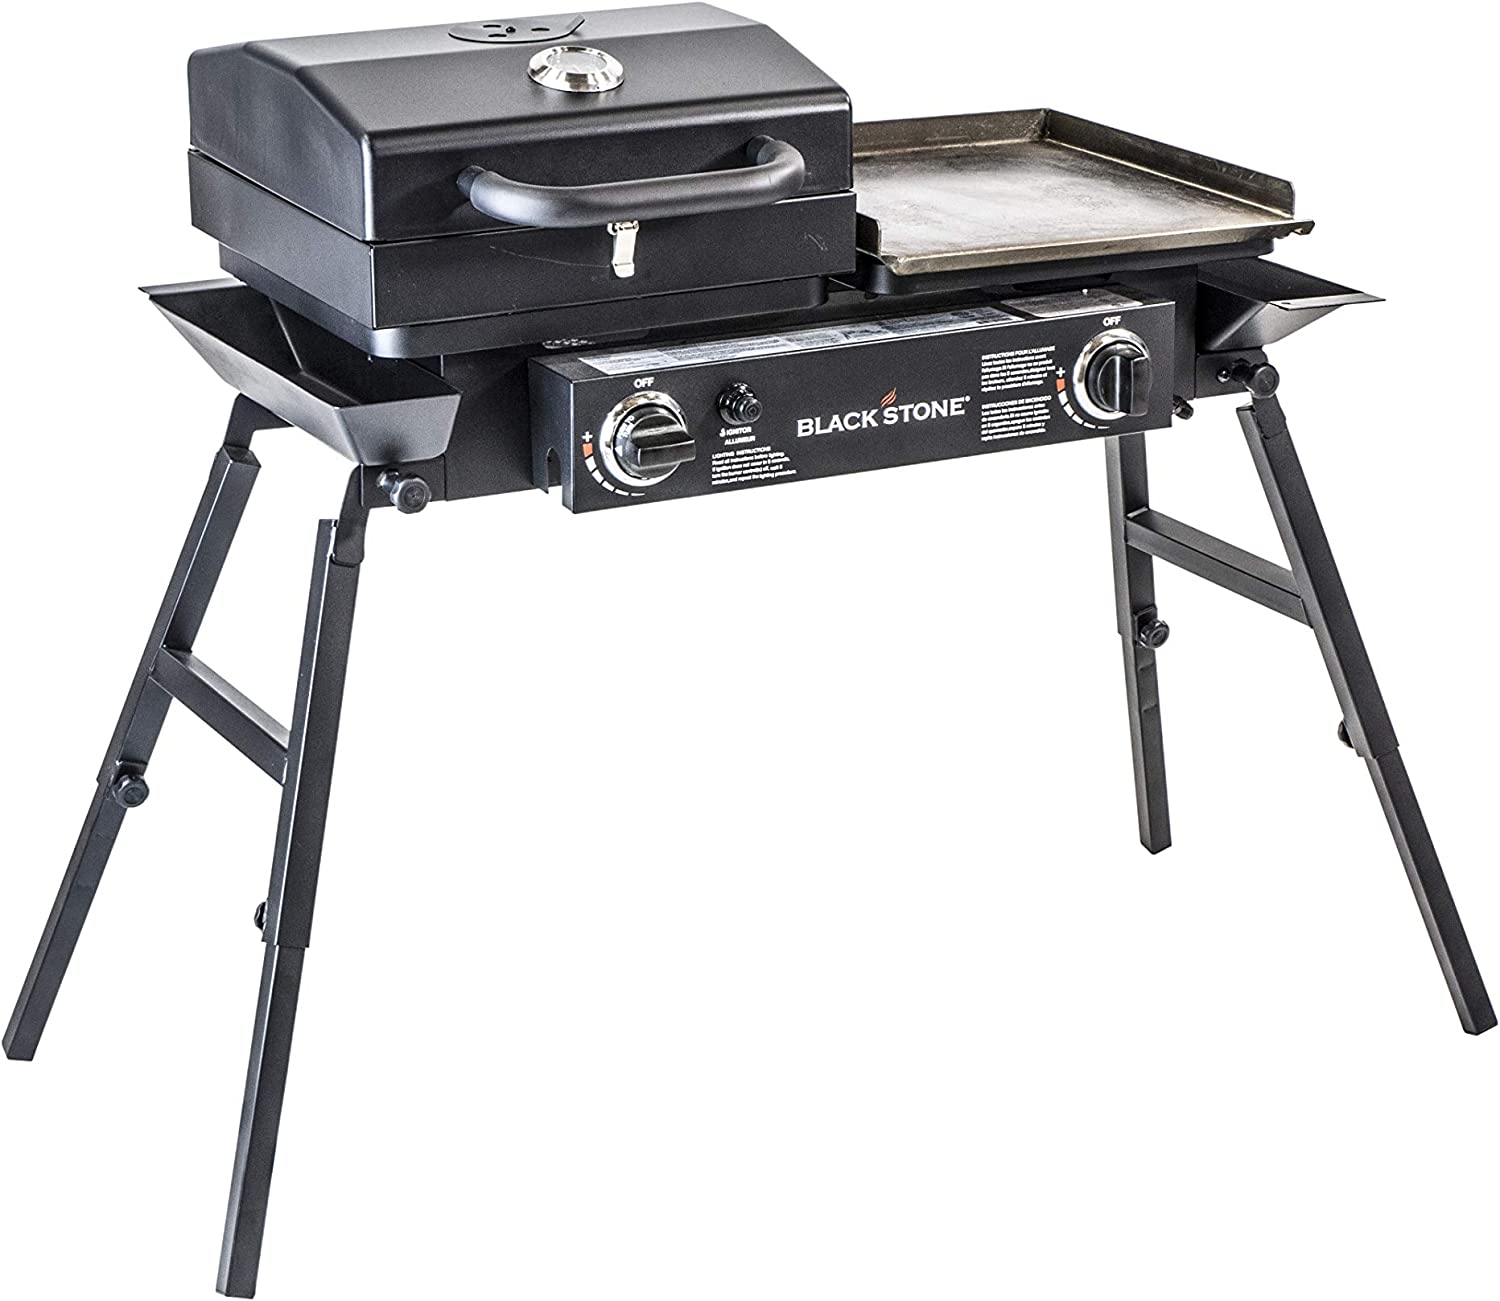  7. Tailgater Portable Gas Grill and Blackstone Griddles 